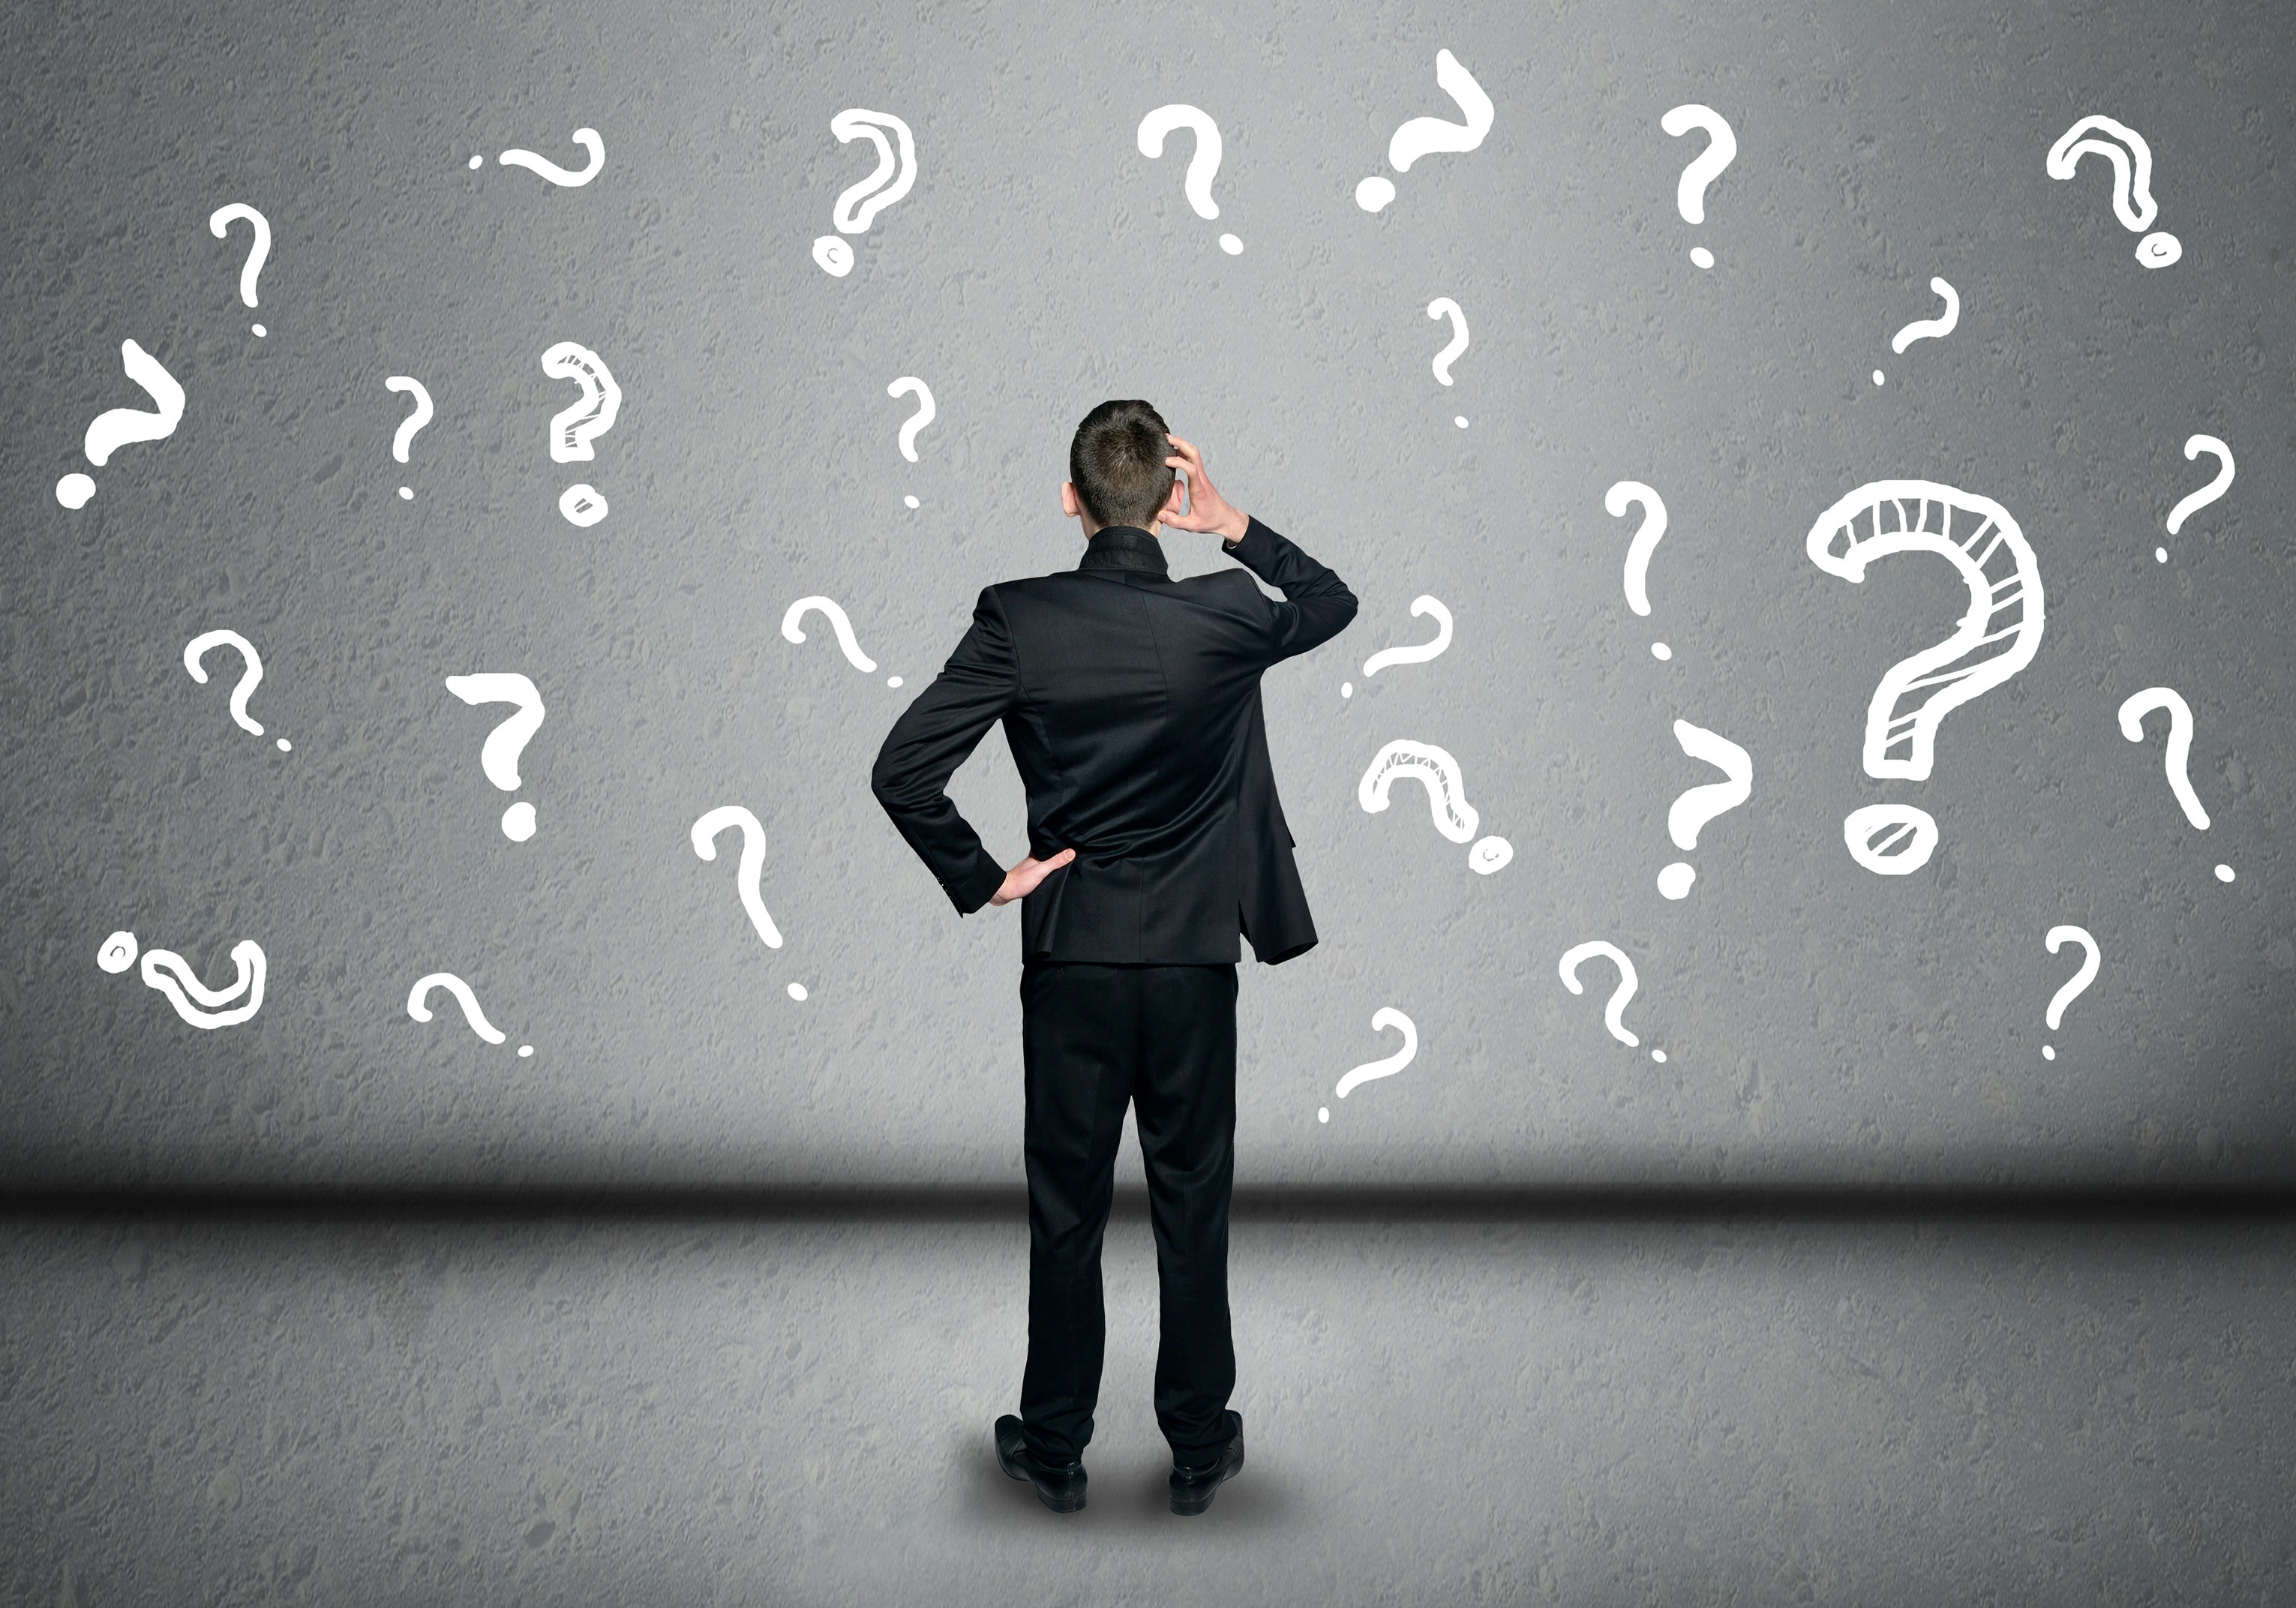 Man standing in front of wall full of question marks